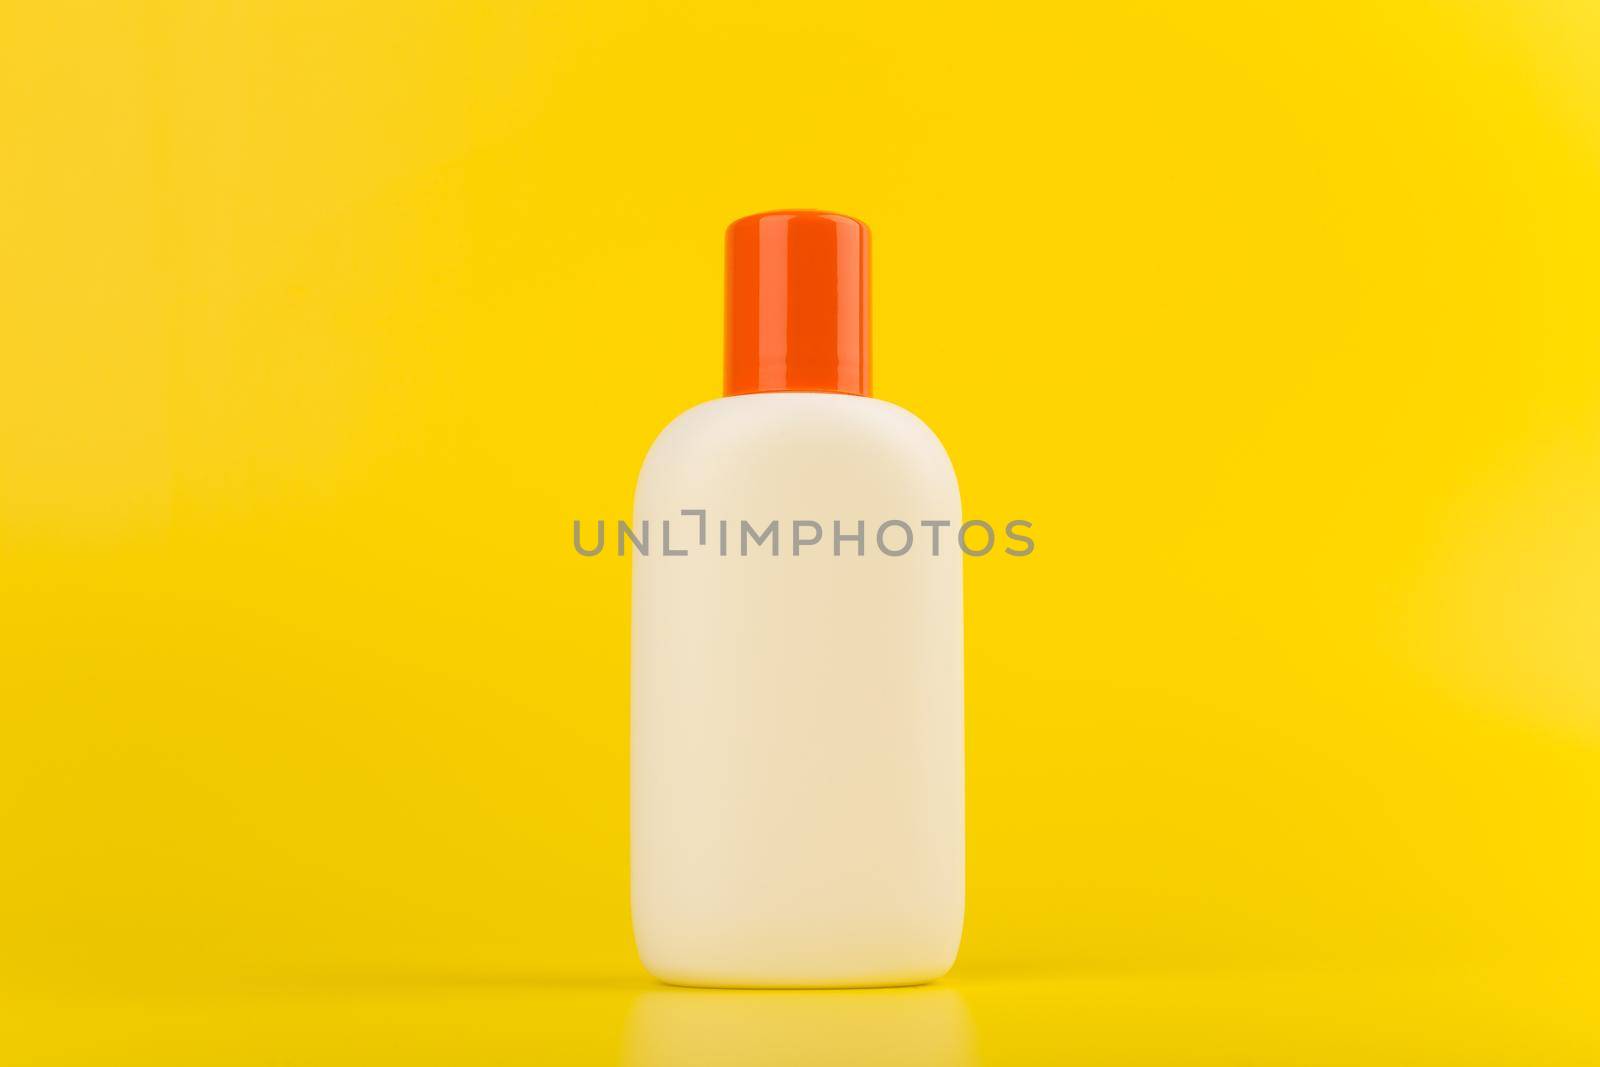 Sunscreen cream or lotion with orange cap on yellow background. Concept of summer skin care and protection by Senorina_Irina